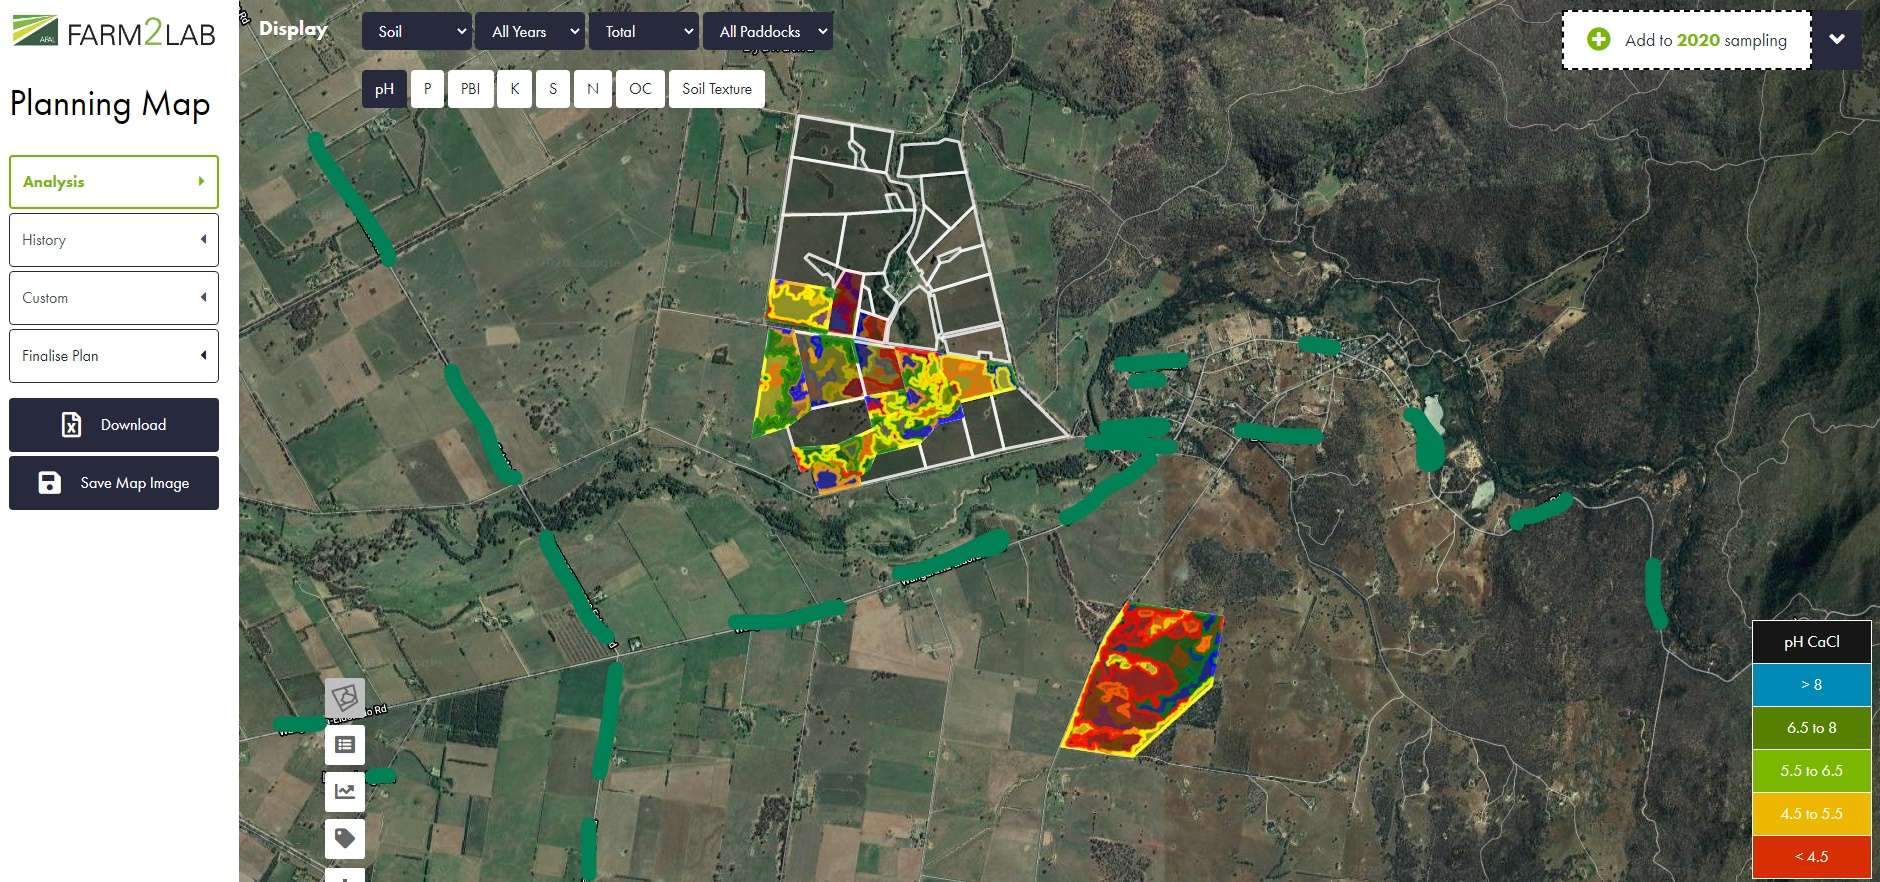 This figure is a screenshot of zone maps in the Farm2Lab app, ready for soil sampling